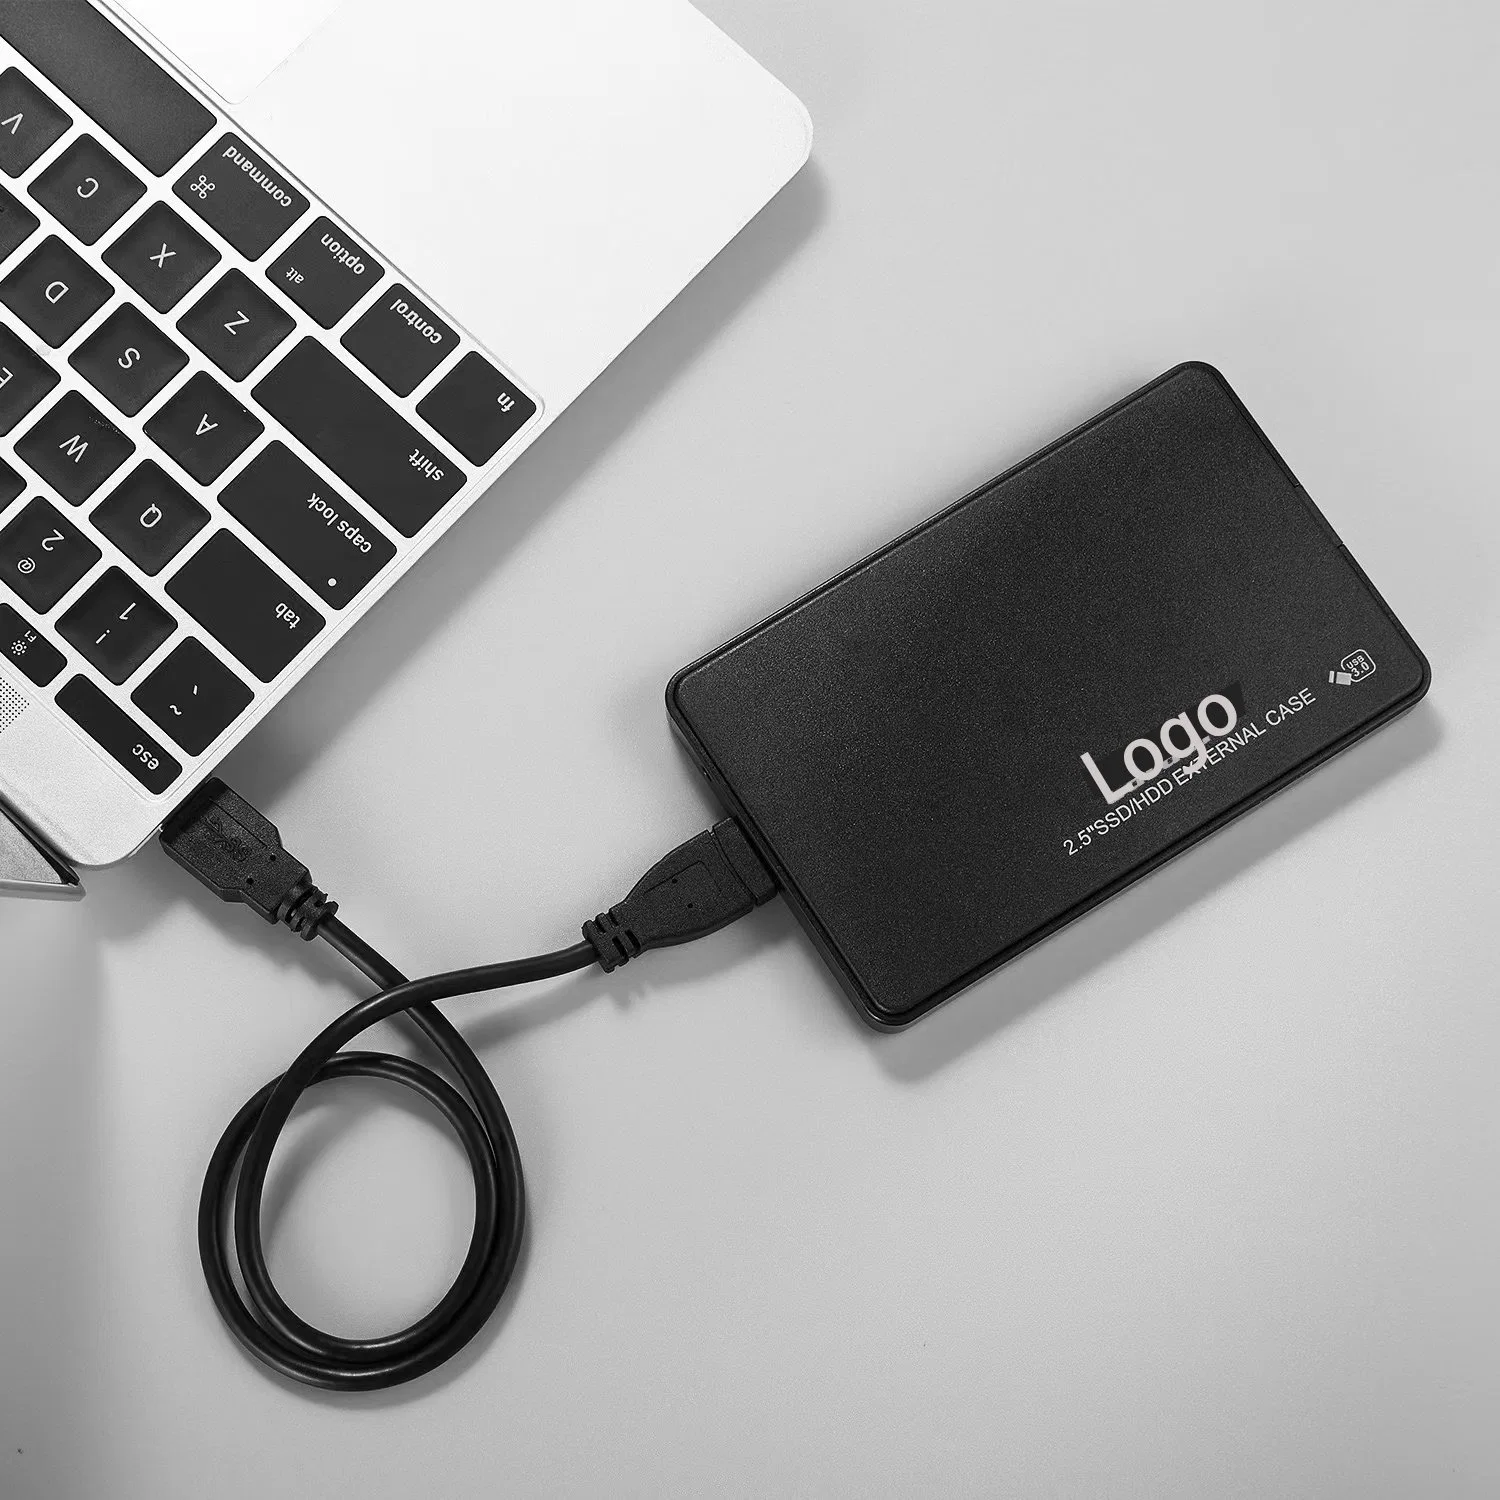 Portable 2.5" HDD Hard Drive 500GB 1tb 2tb OEM (Logo can Customize in Bulk) USB 3.0 External Hard Drive 2.5 Inch Hard Disk for PC Computer USB 2.0 Compatible